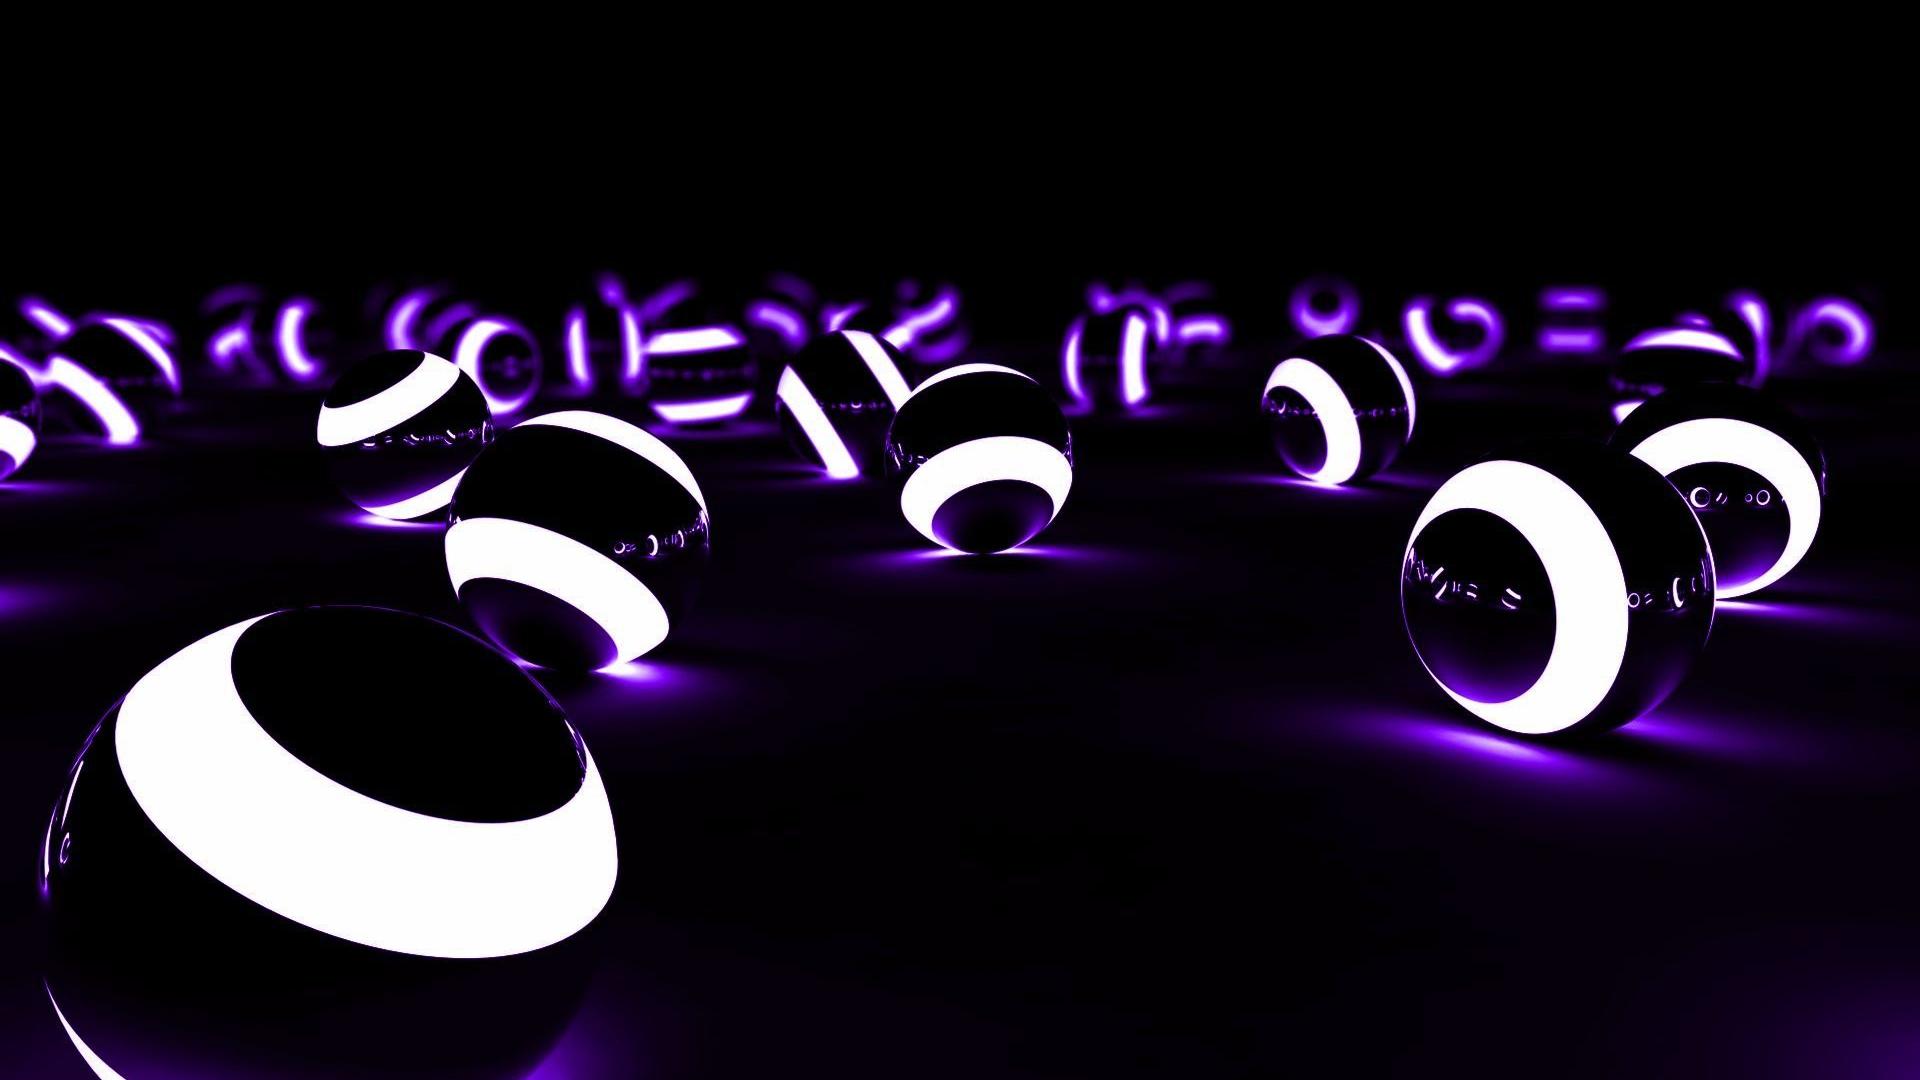 Glowing Balls Cool Wallpaper Share This On